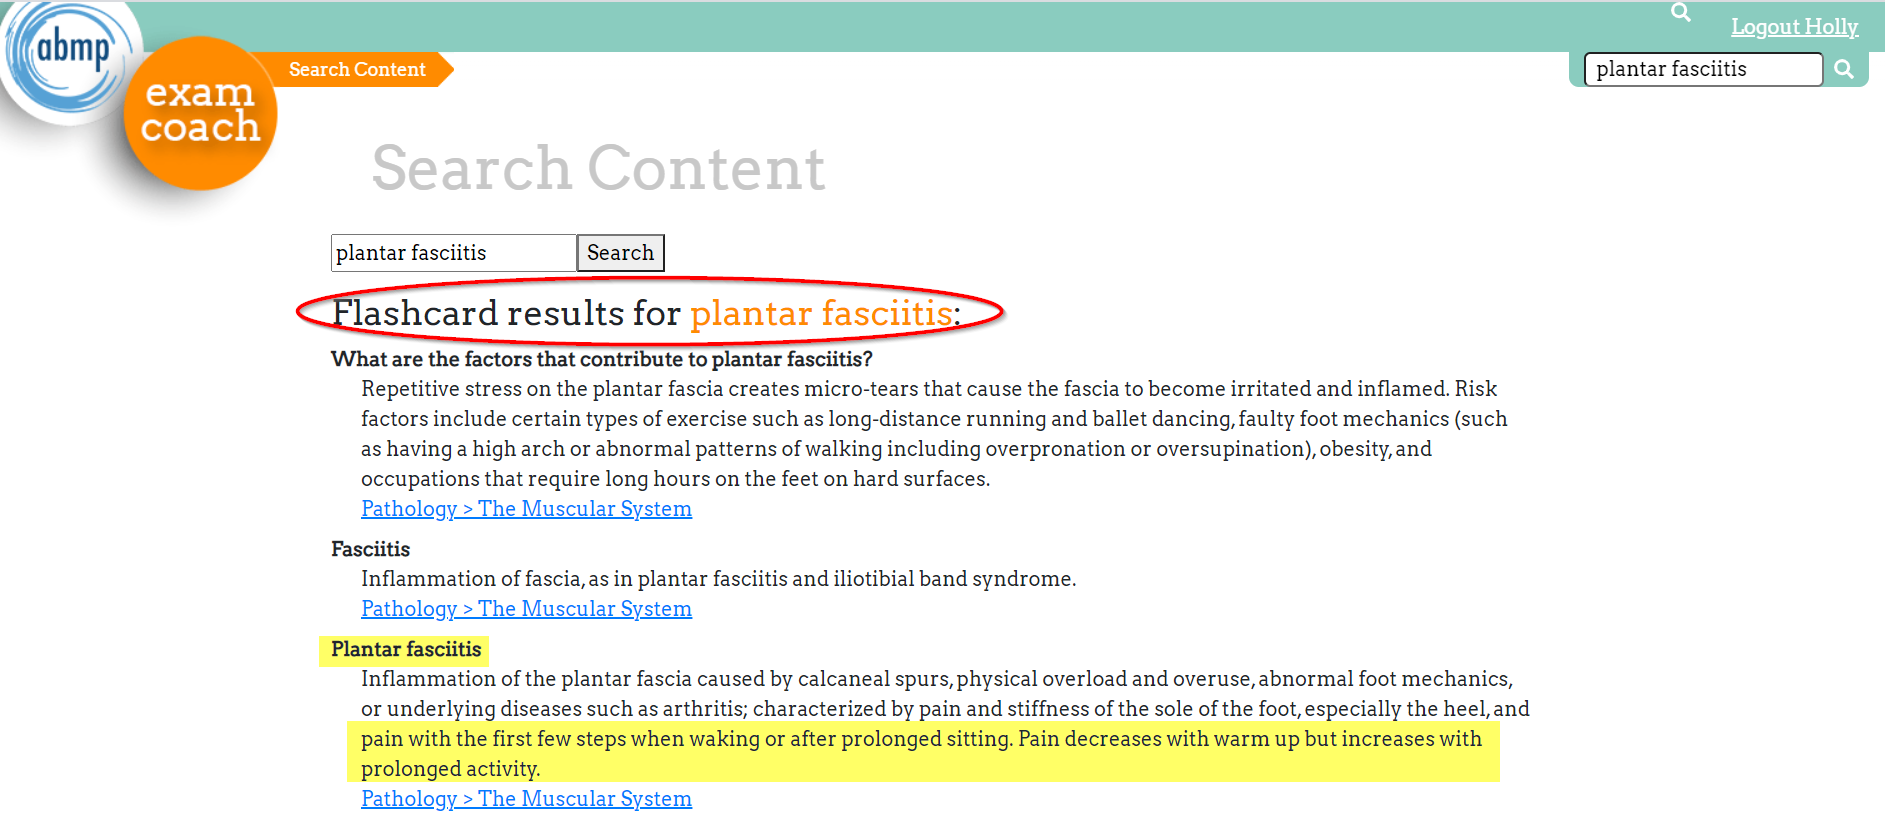 ABMP Exam Coach flashcard result for plantar fasciitis from an enhanced search query.